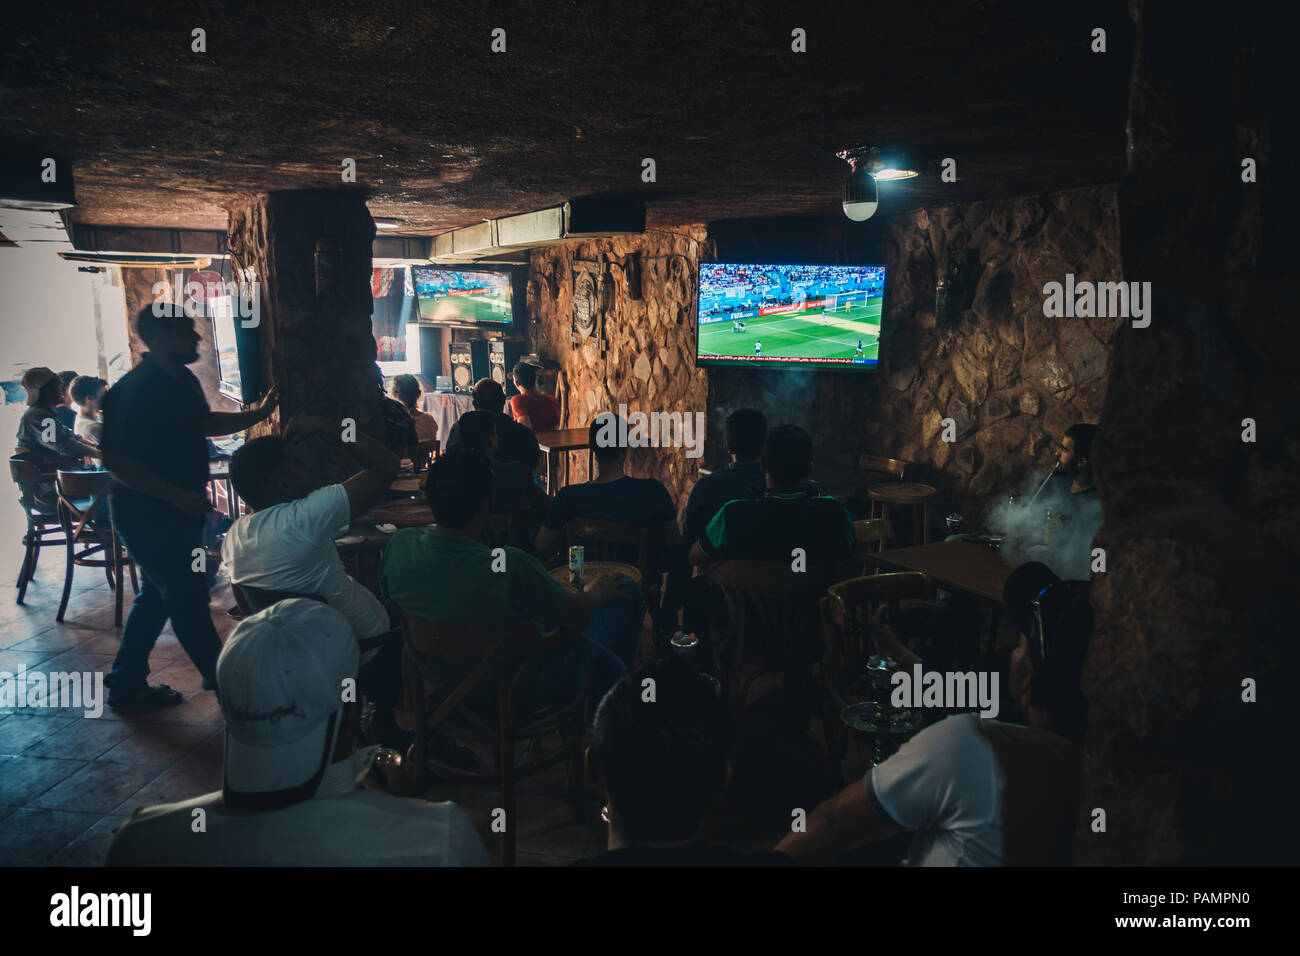 a group of Jordanian men smoke hookah and watch Argentina play France in the FIFA World Cup 2018 in a bar in Wadi Musa, Jordan Stock Photo